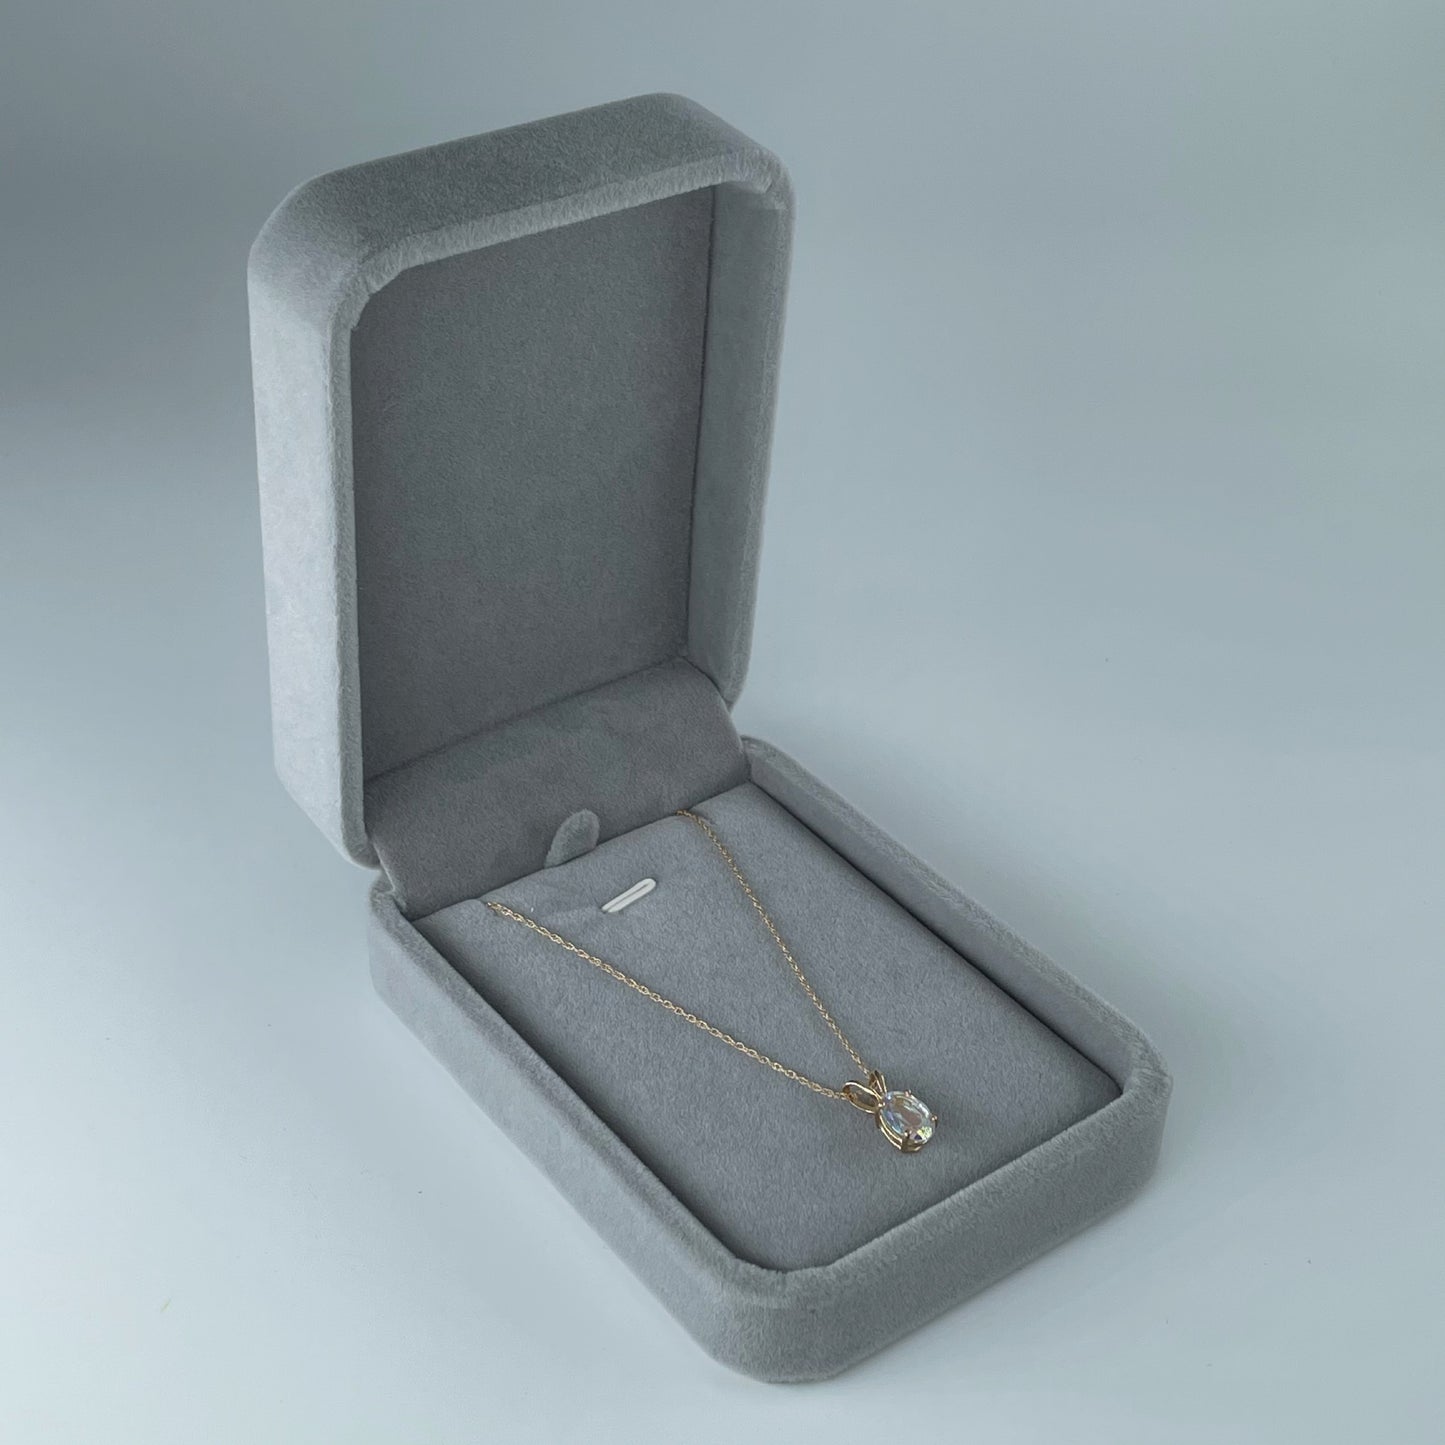 Grey velvet necklace box from Collective & Co.